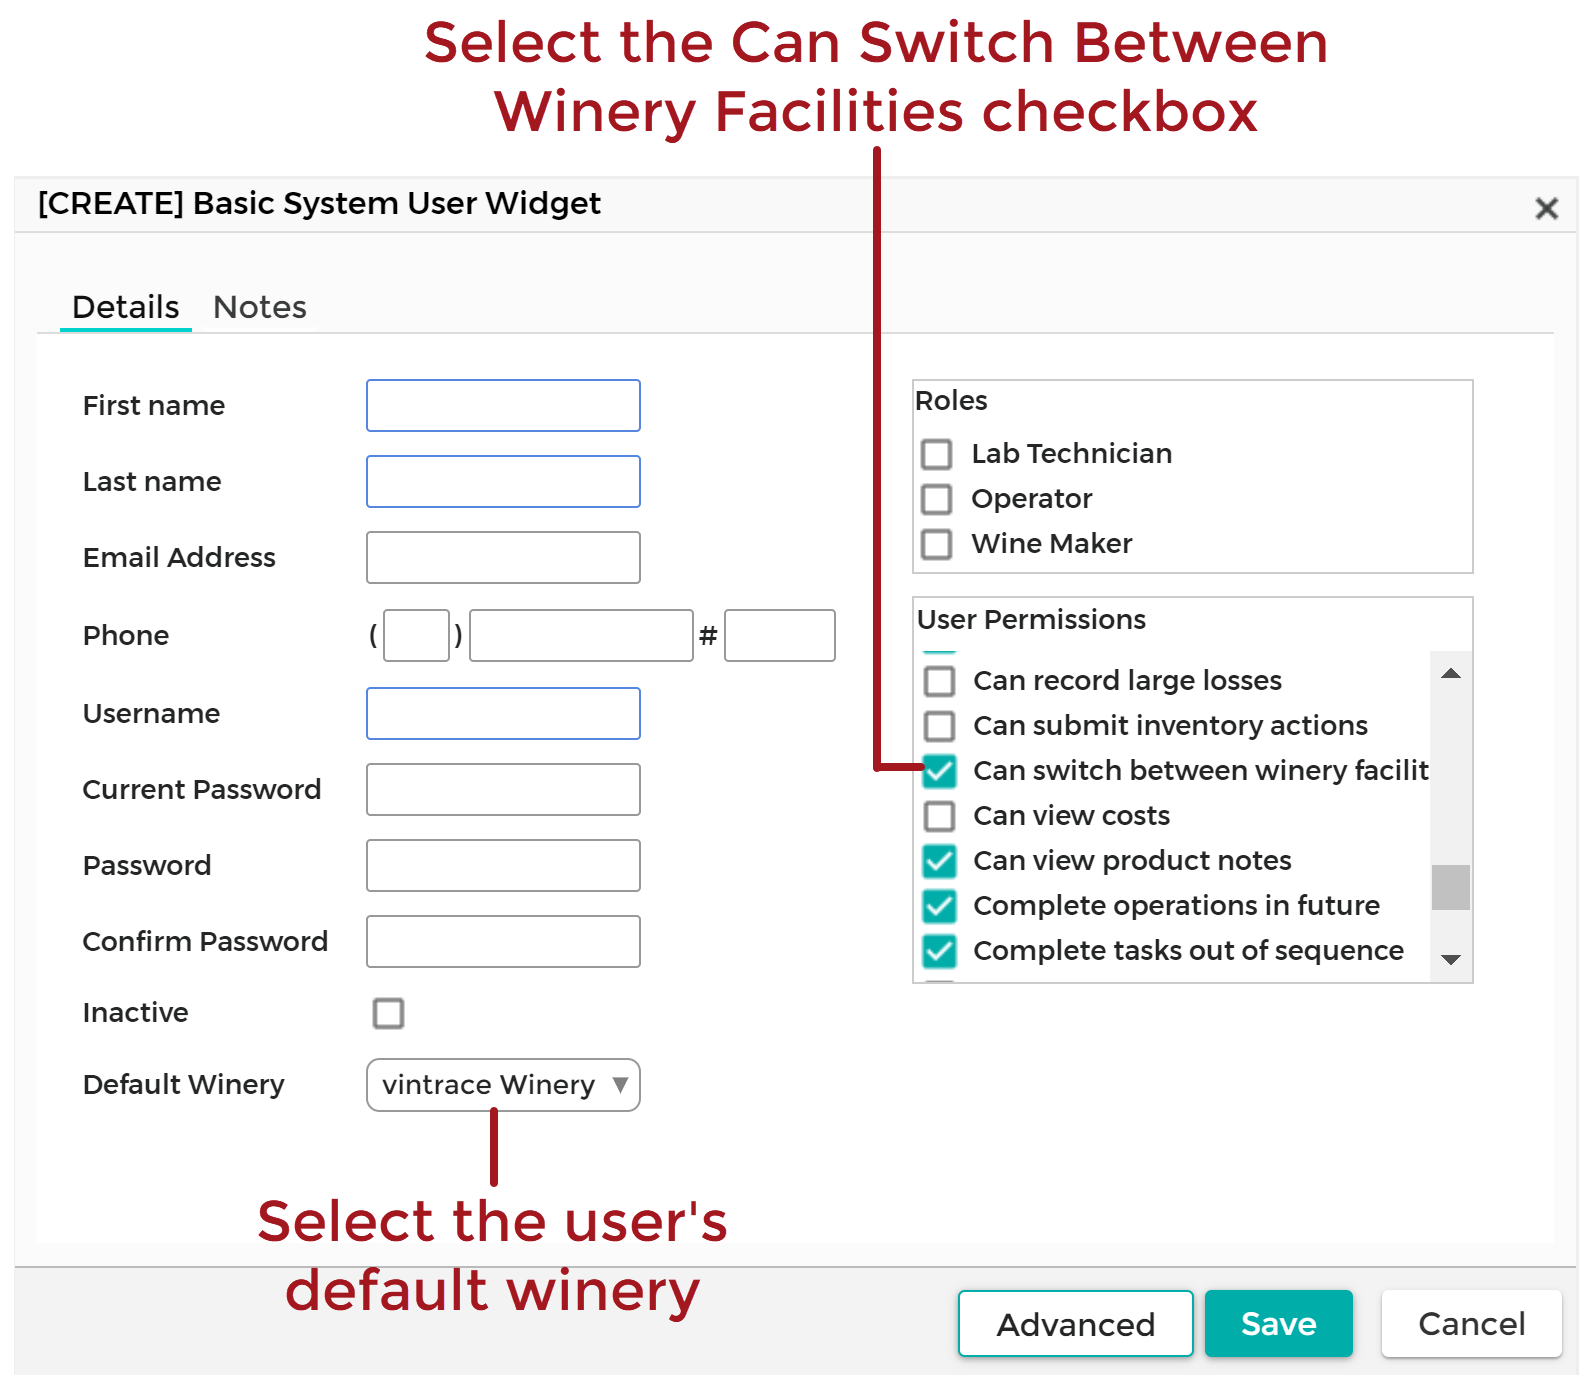 Create_Basic_System_User_Widget_-_Multiple_Wineries_20201019.png